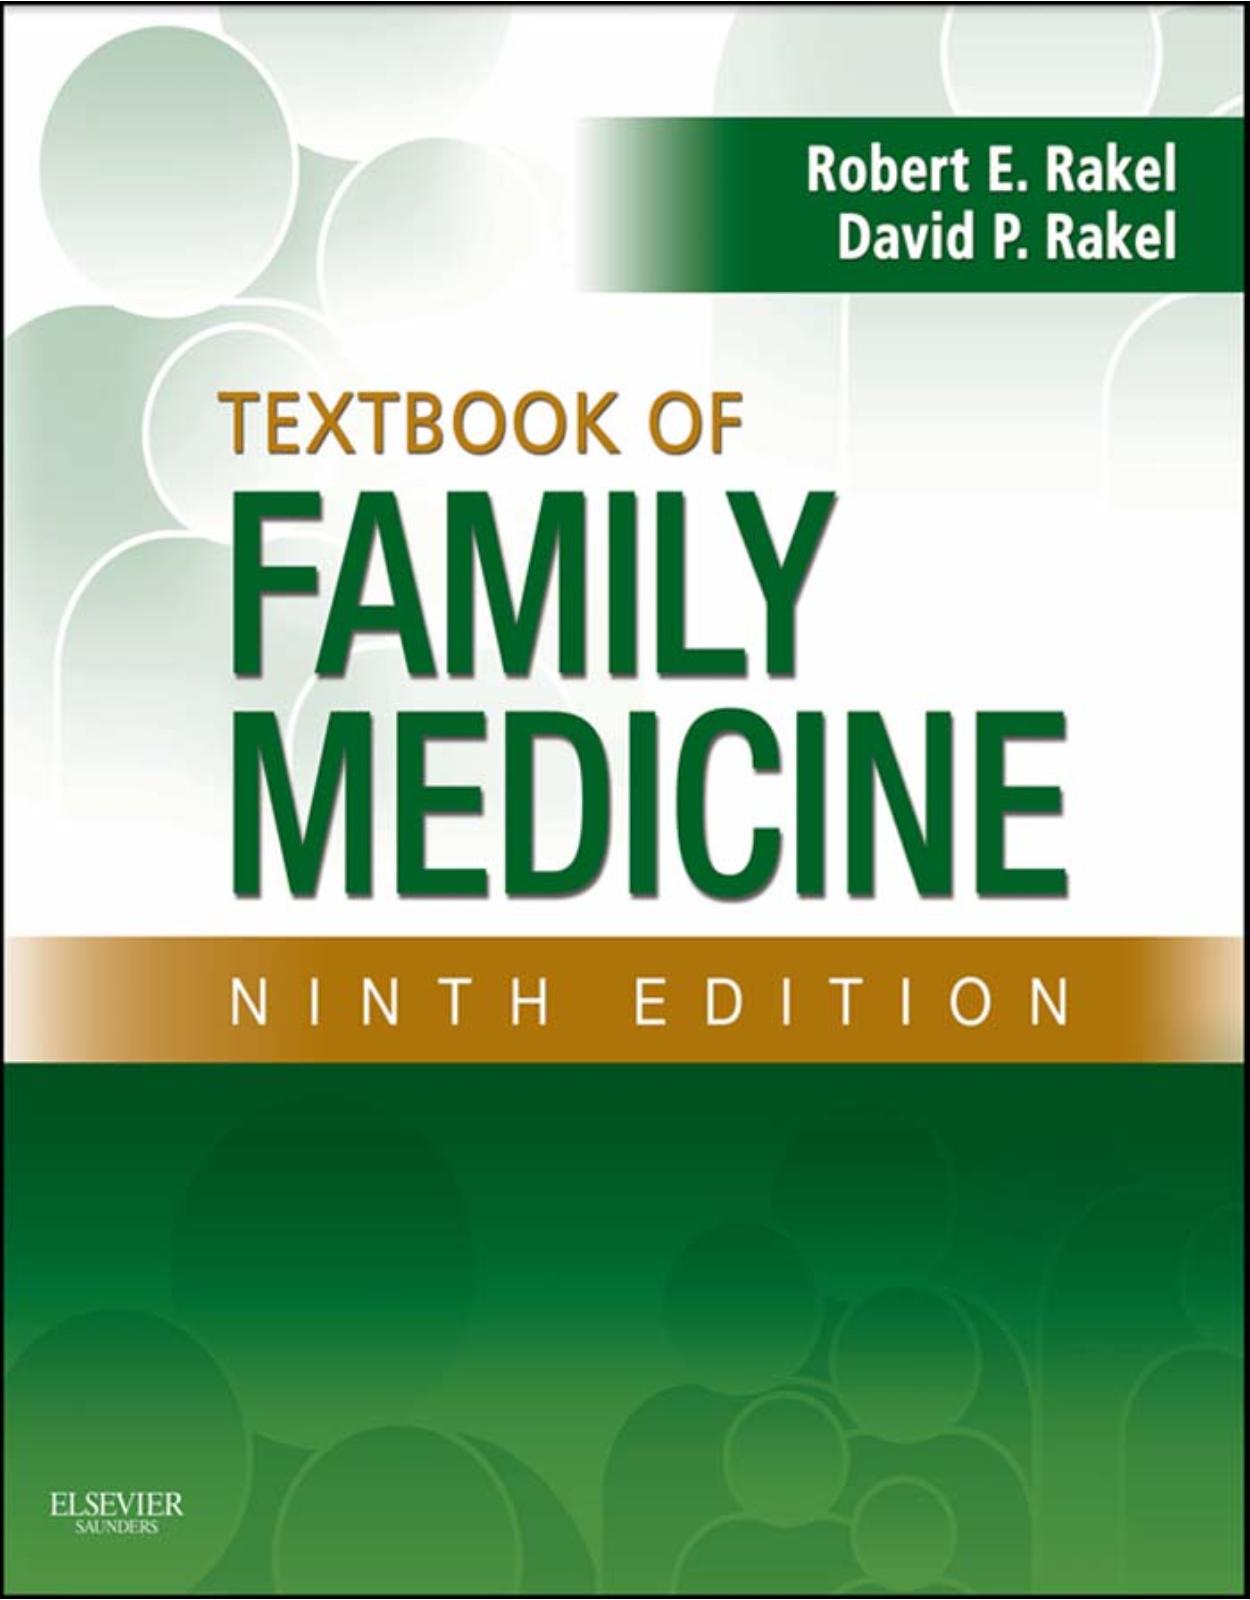 Textbook of Family Medicine, 9th Edition